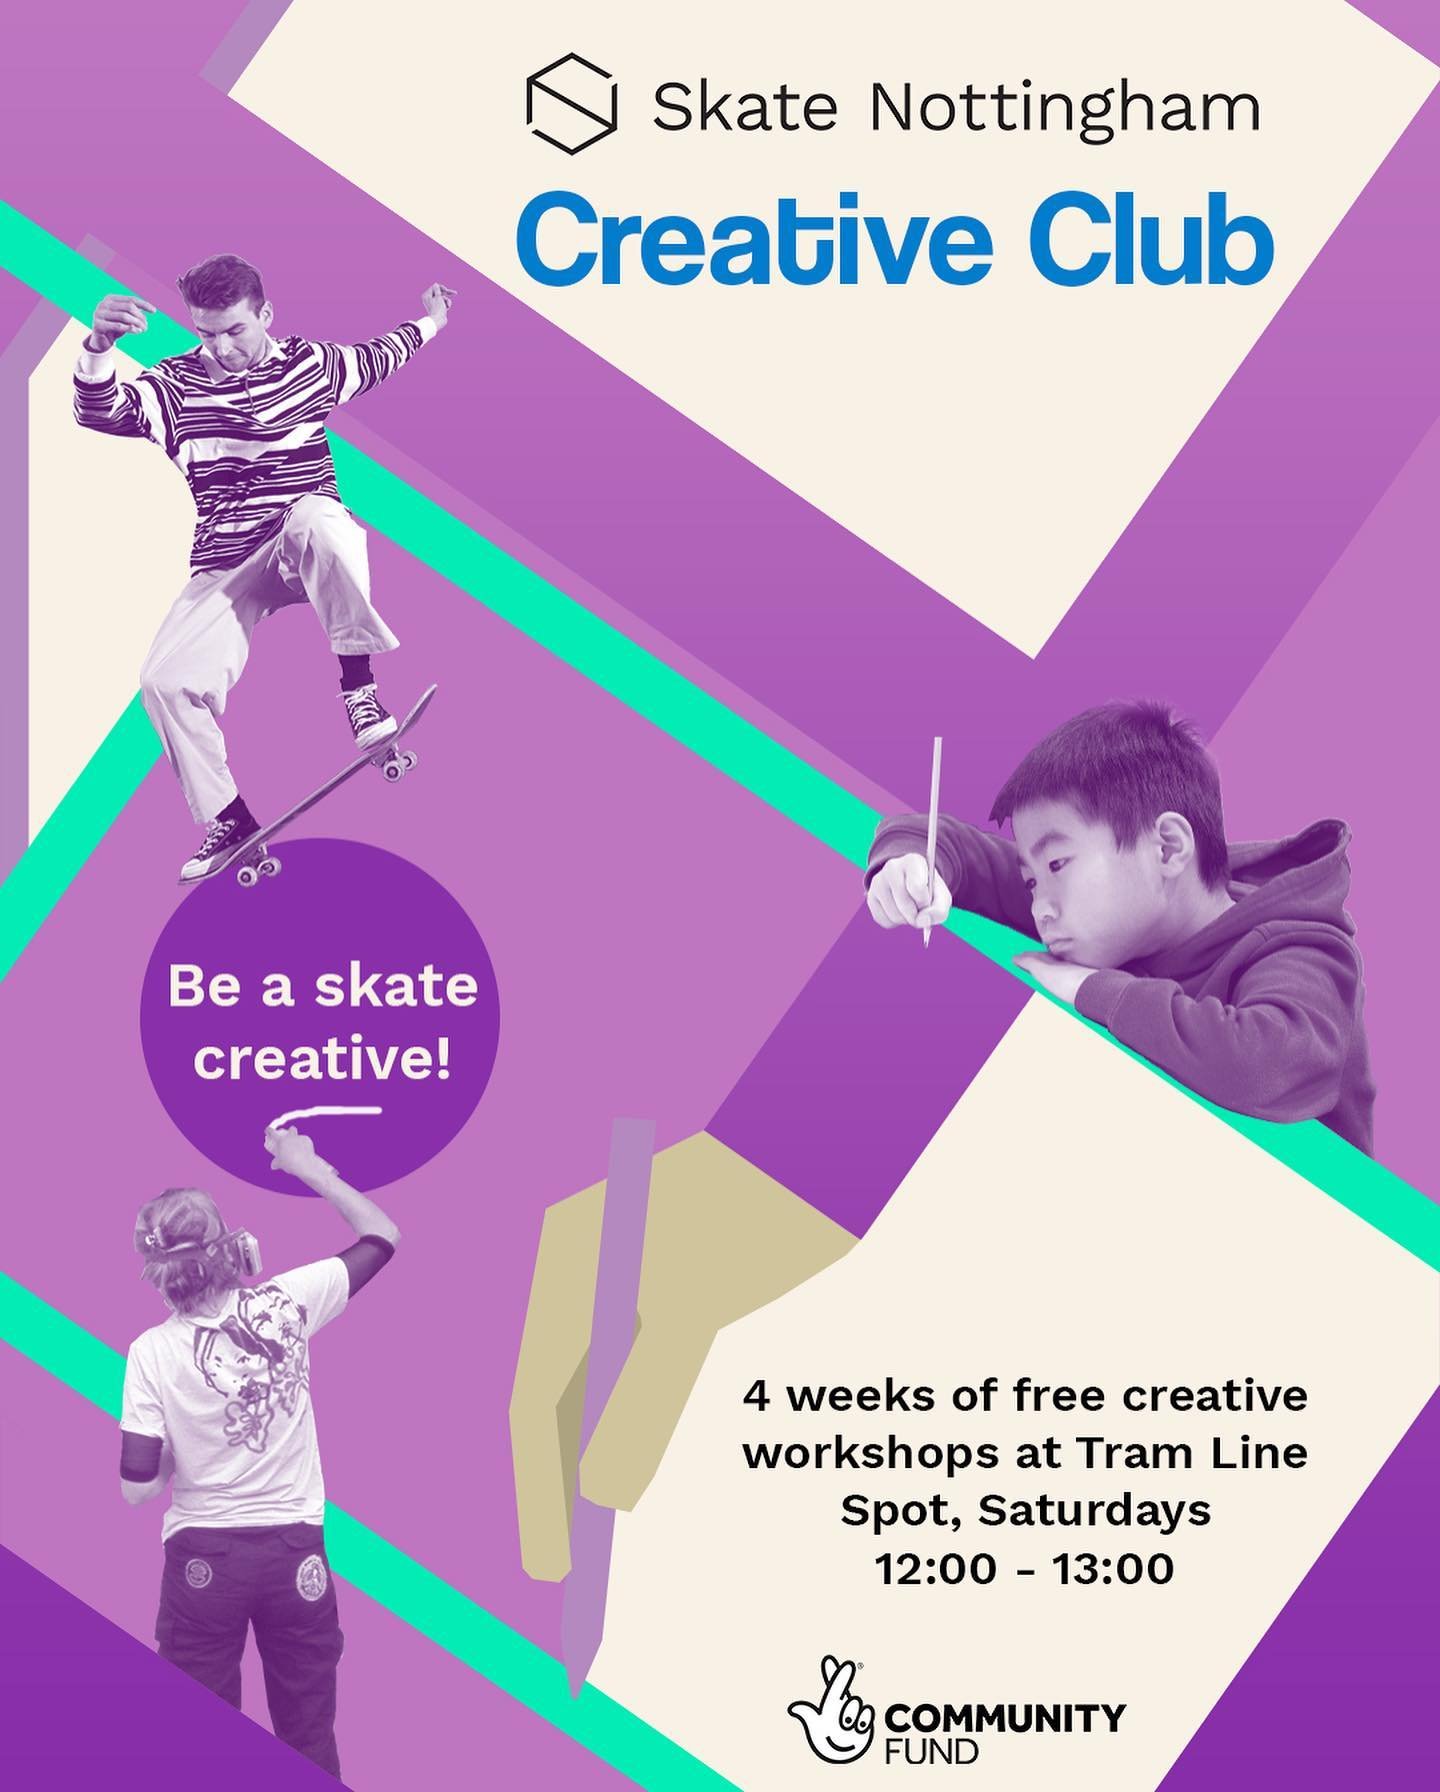 Creative Club is back! First launched as a 10-week programme back in 2022, to explore illustration, design, photography, filming &amp; more with a young cohort of skaters, we&rsquo;ve since done lots of workshops here and there around skateparks of N